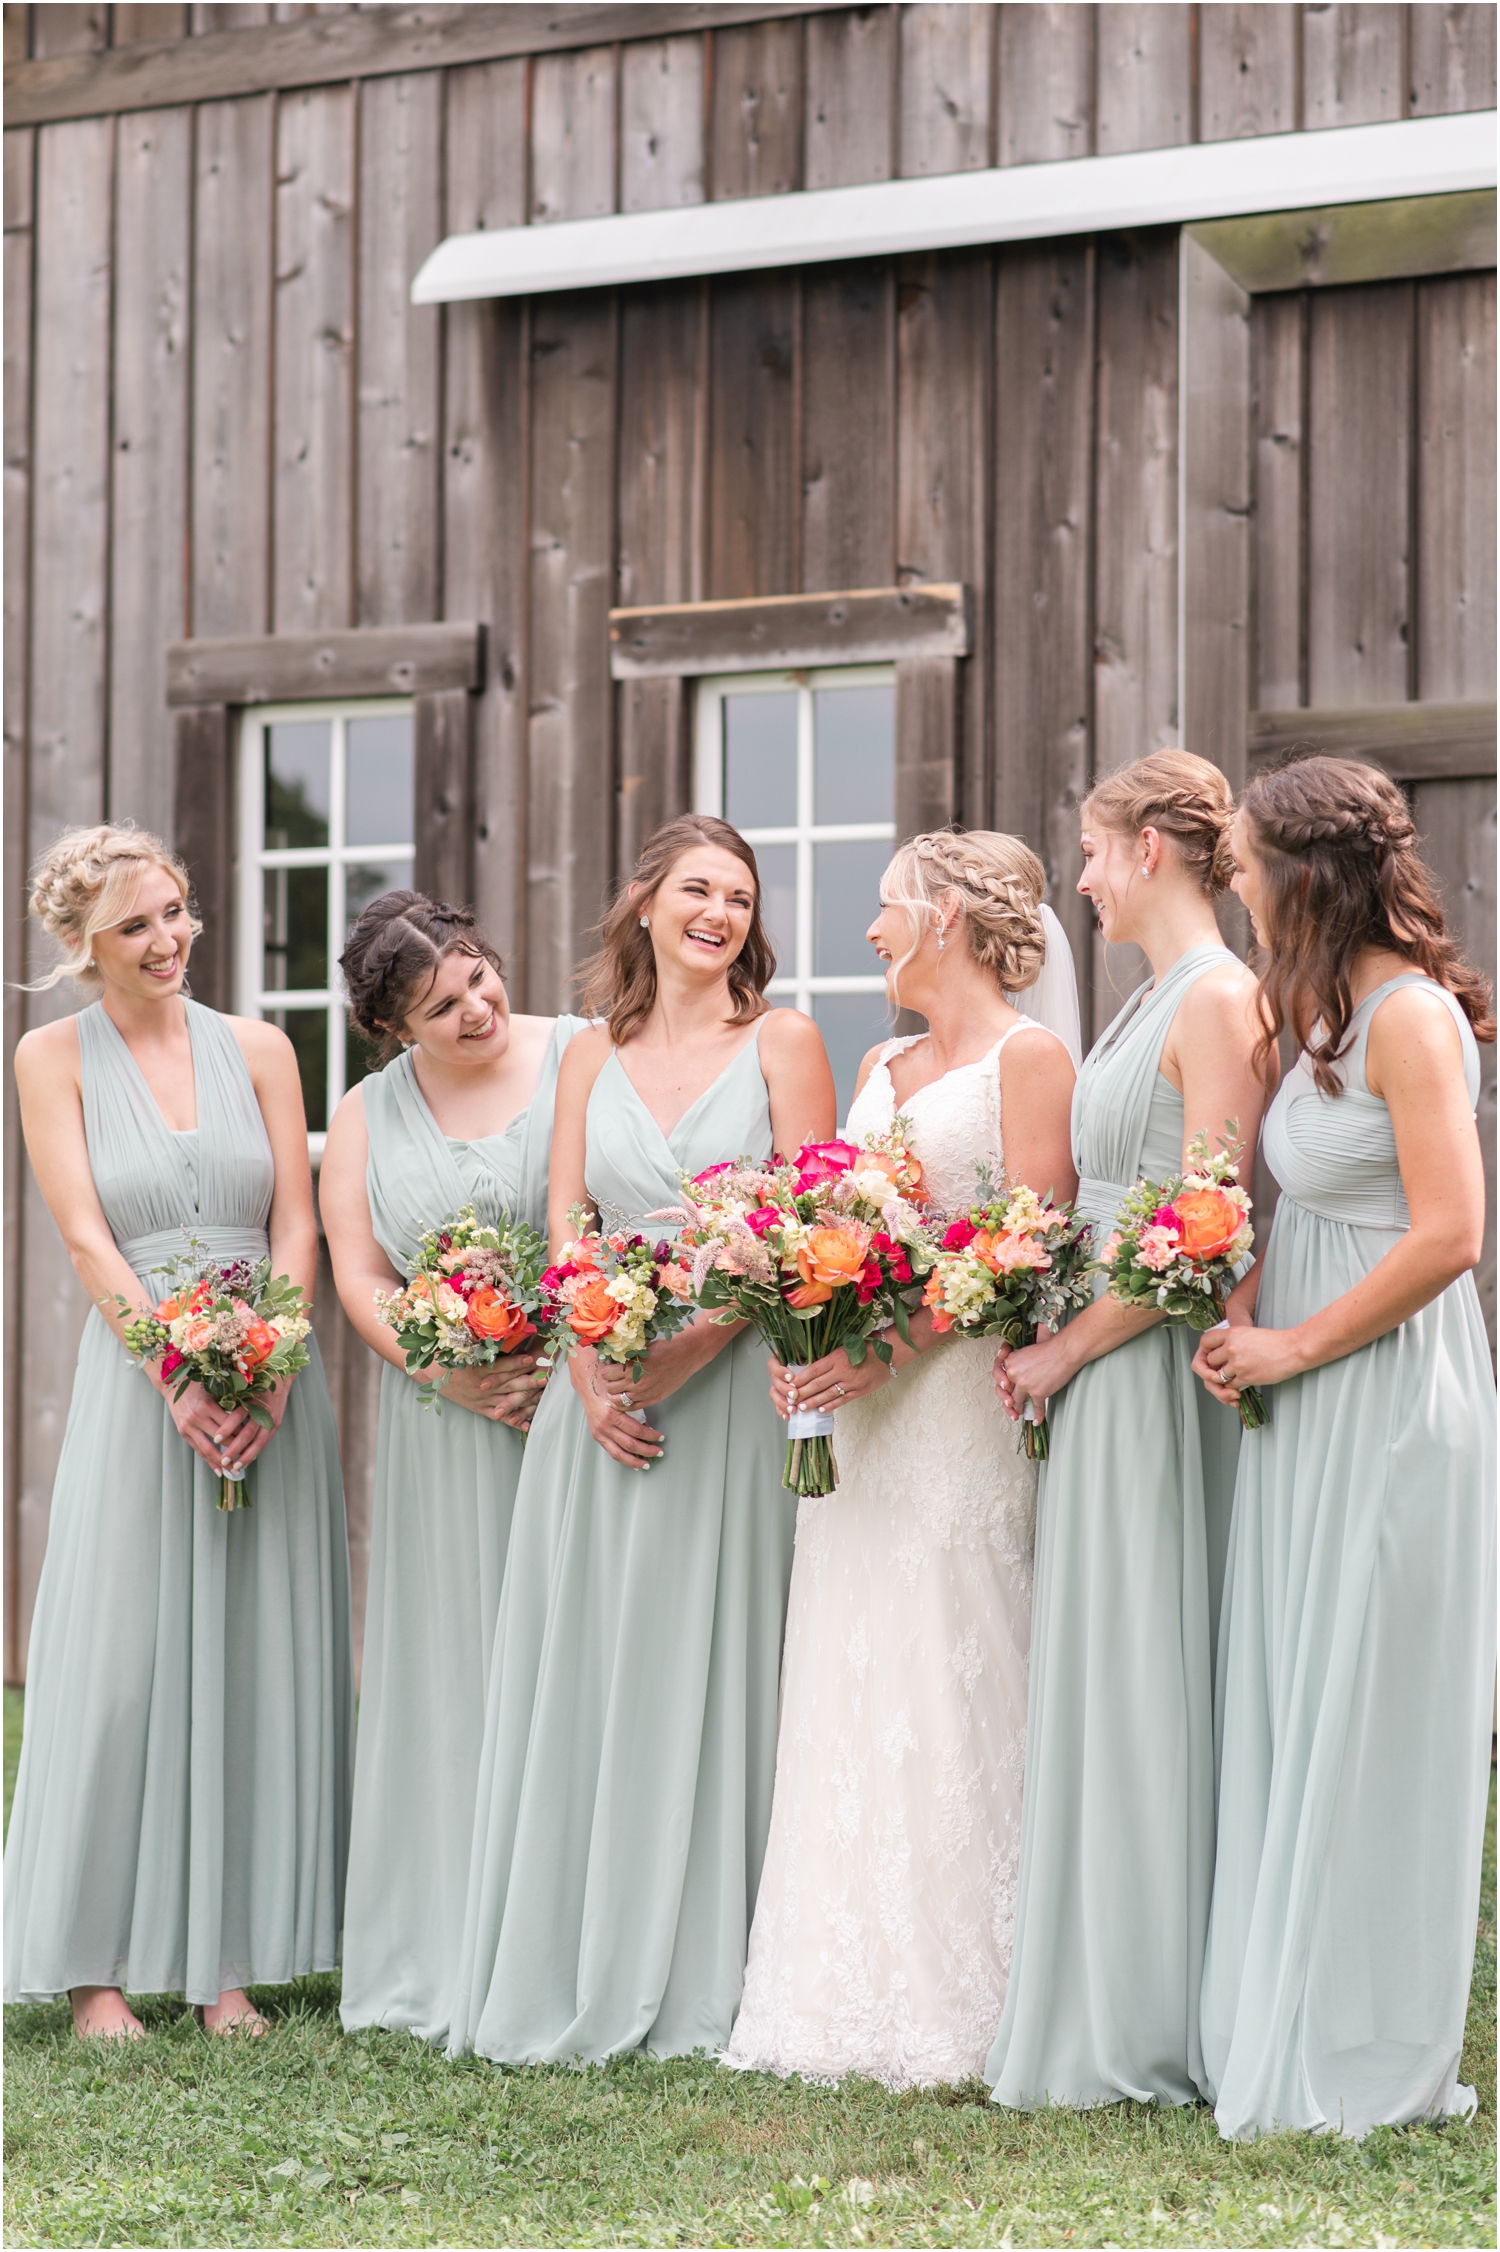 Bridesmaids photos The Barn at Kennedy Farm Wedding with bright, colorful bouquets and sage green bridesmaids Indiana Wedding Photographer Rose Courts Photography